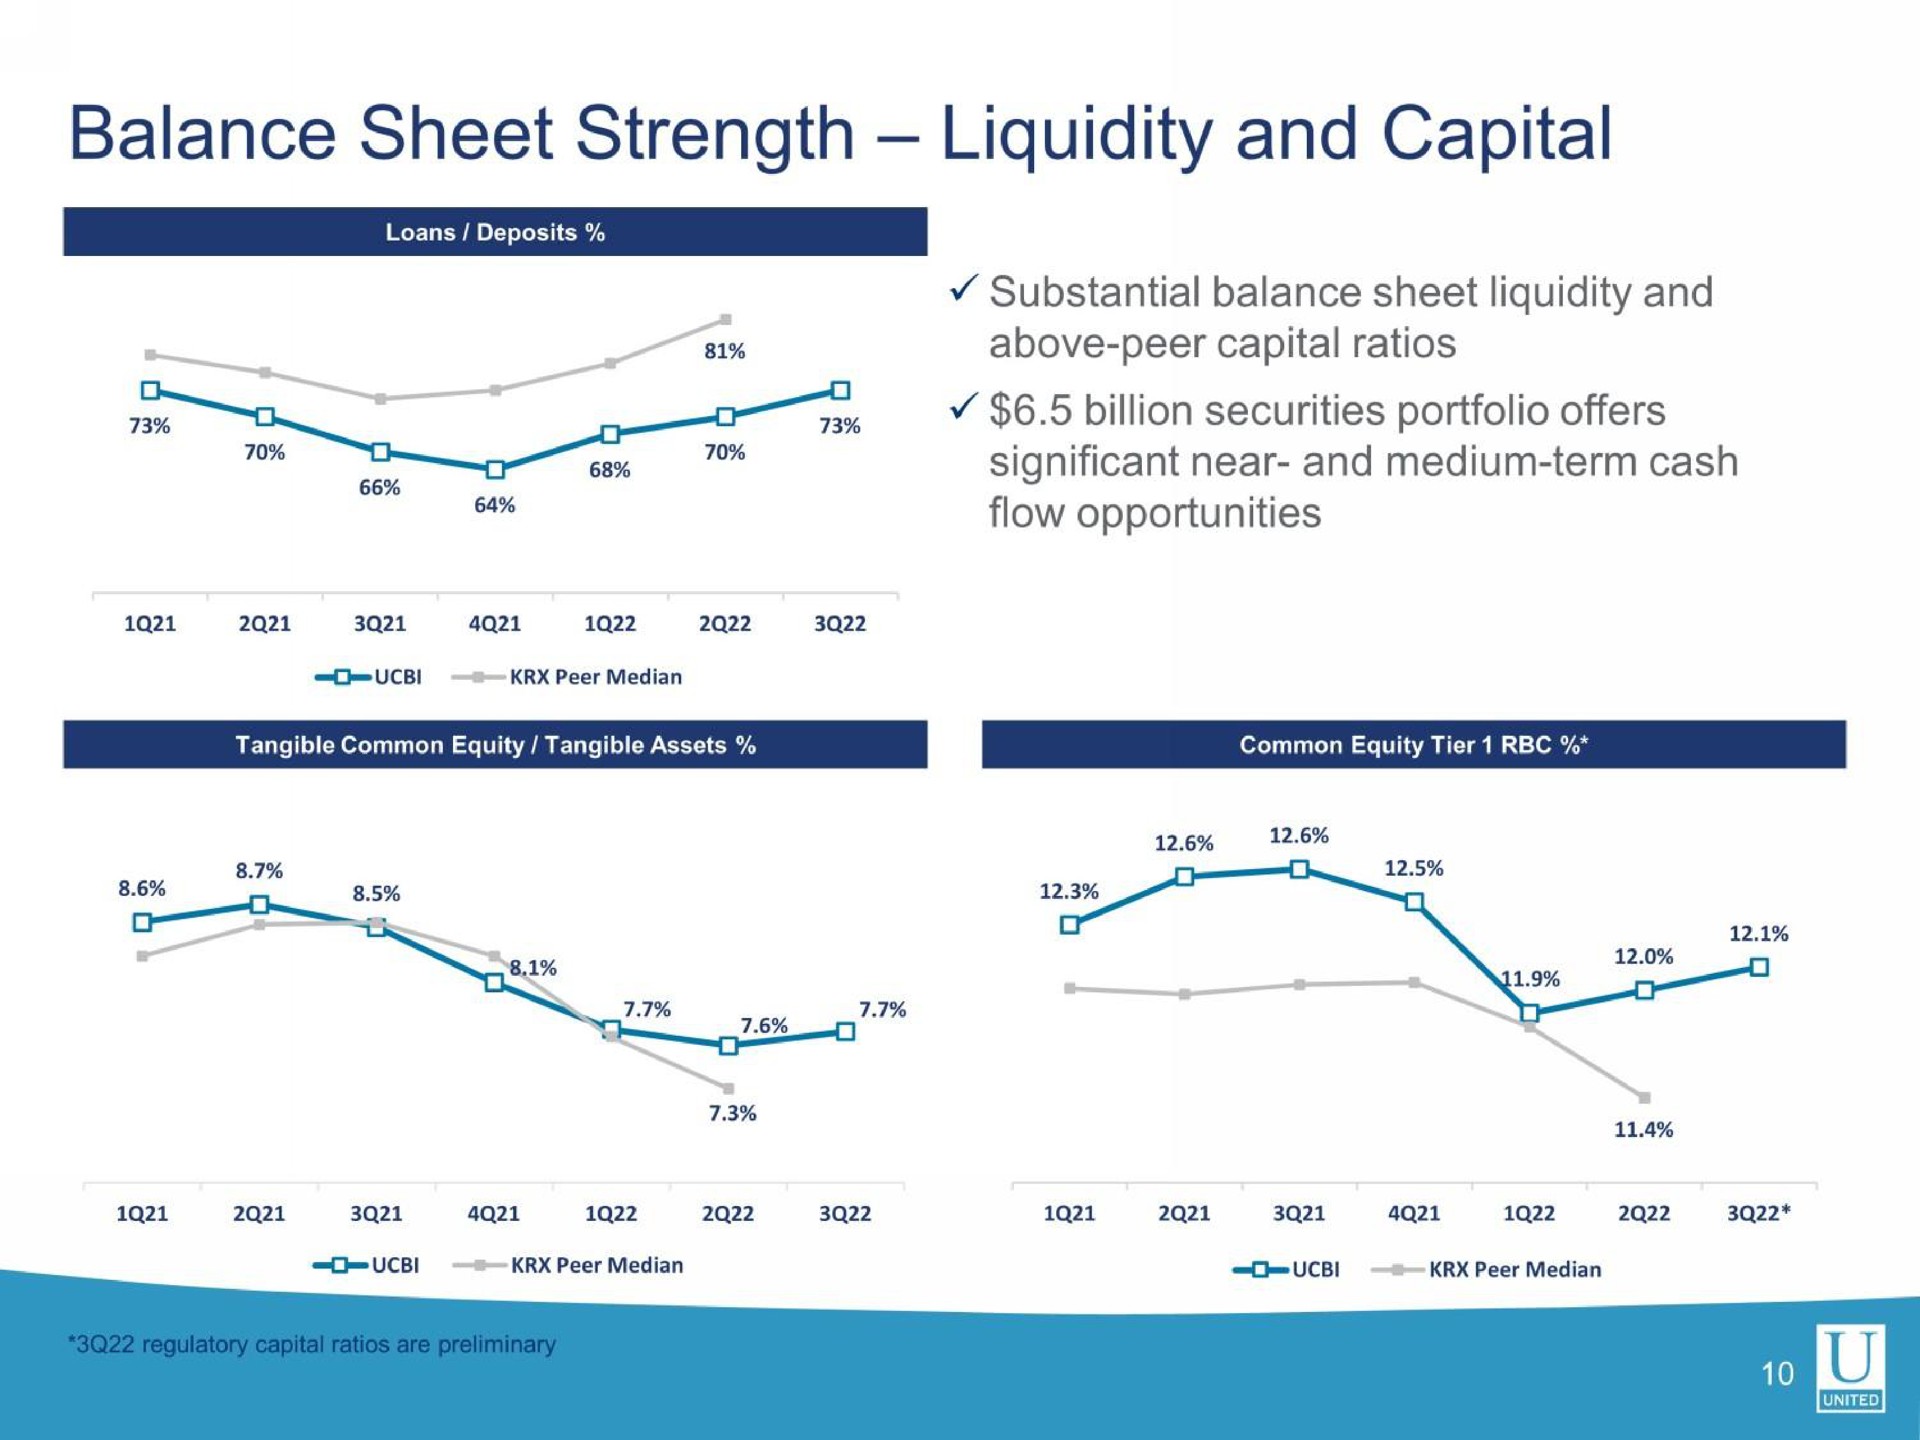 balance sheet strength liquidity and capital a significant near and medium term cash flow opportunities | United Community Banks